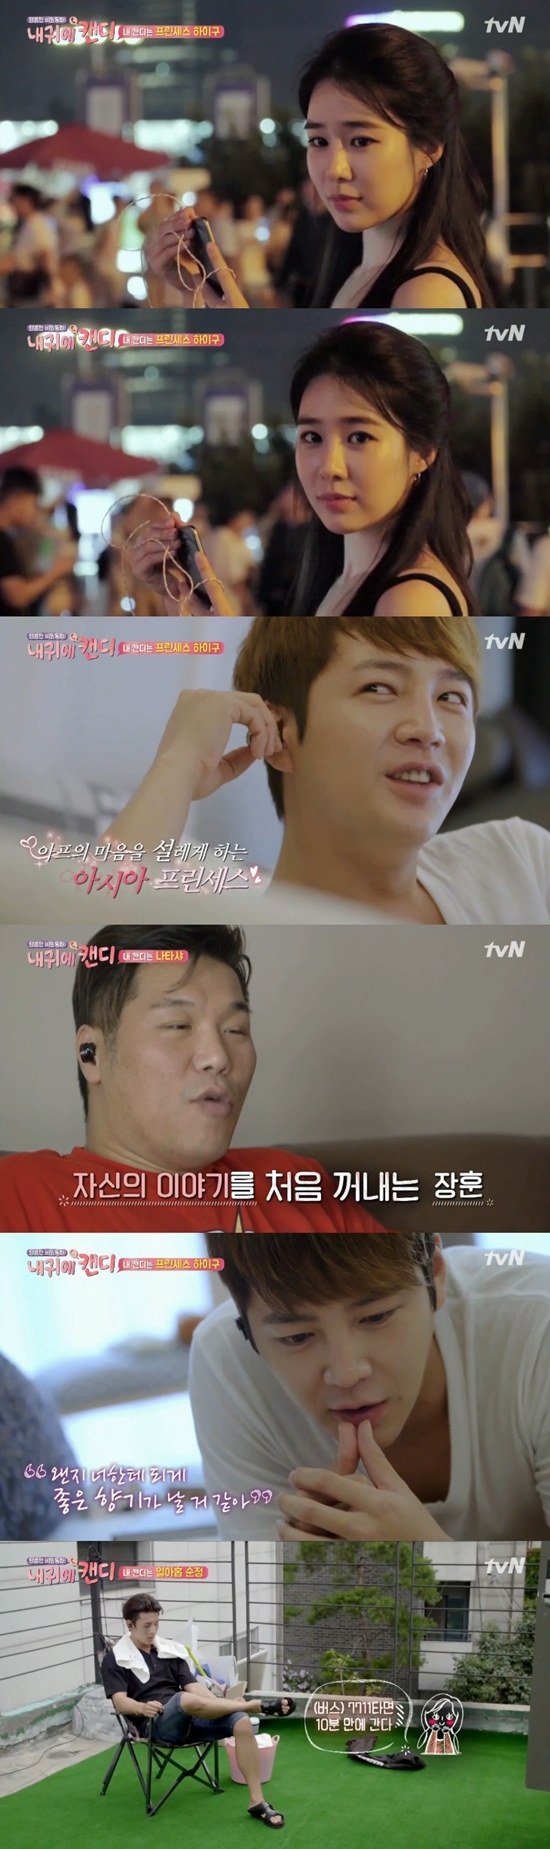 &quot;Candy In My Ears&quot; Jang Geun-seok's Candy is Yoo In-na